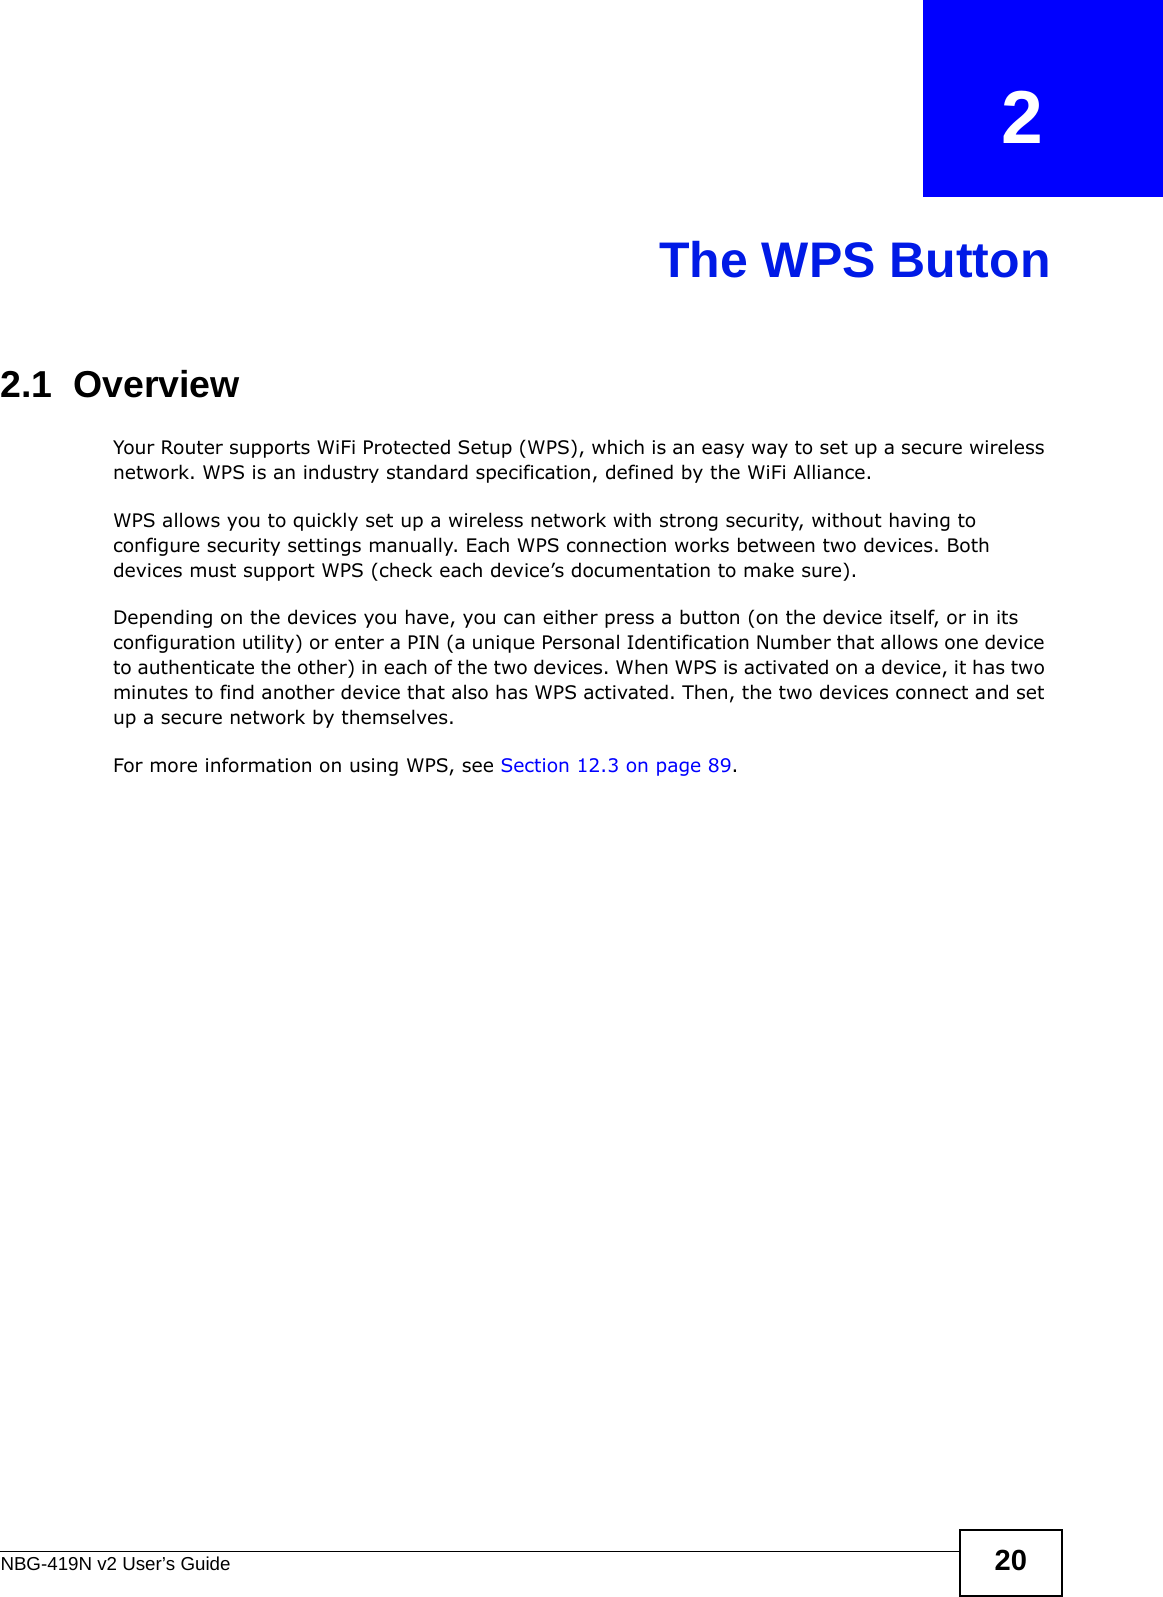 NBG-419N v2 User’s Guide 20CHAPTER   2The WPS Button2.1  OverviewYour Router supports WiFi Protected Setup (WPS), which is an easy way to set up a secure wireless network. WPS is an industry standard specification, defined by the WiFi Alliance.WPS allows you to quickly set up a wireless network with strong security, without having to configure security settings manually. Each WPS connection works between two devices. Both devices must support WPS (check each device’s documentation to make sure). Depending on the devices you have, you can either press a button (on the device itself, or in its configuration utility) or enter a PIN (a unique Personal Identification Number that allows one device to authenticate the other) in each of the two devices. When WPS is activated on a device, it has two minutes to find another device that also has WPS activated. Then, the two devices connect and set up a secure network by themselves.For more information on using WPS, see Section 12.3 on page 89.